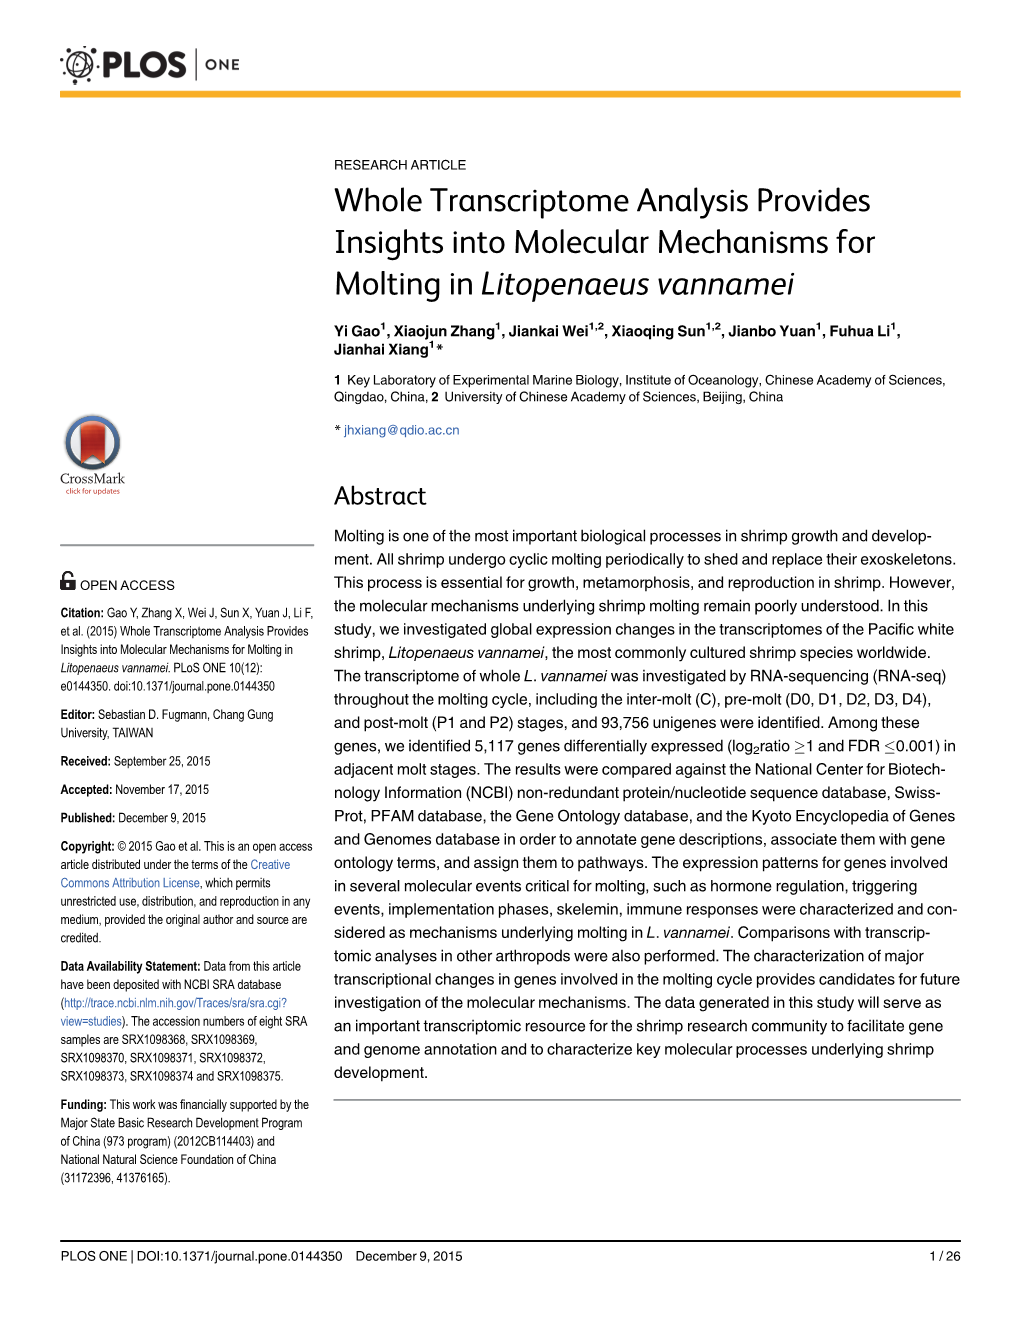 Whole Transcriptome Analysis Provides Insights Into Molecular Mechanisms for Molting in Litopenaeus Vannamei